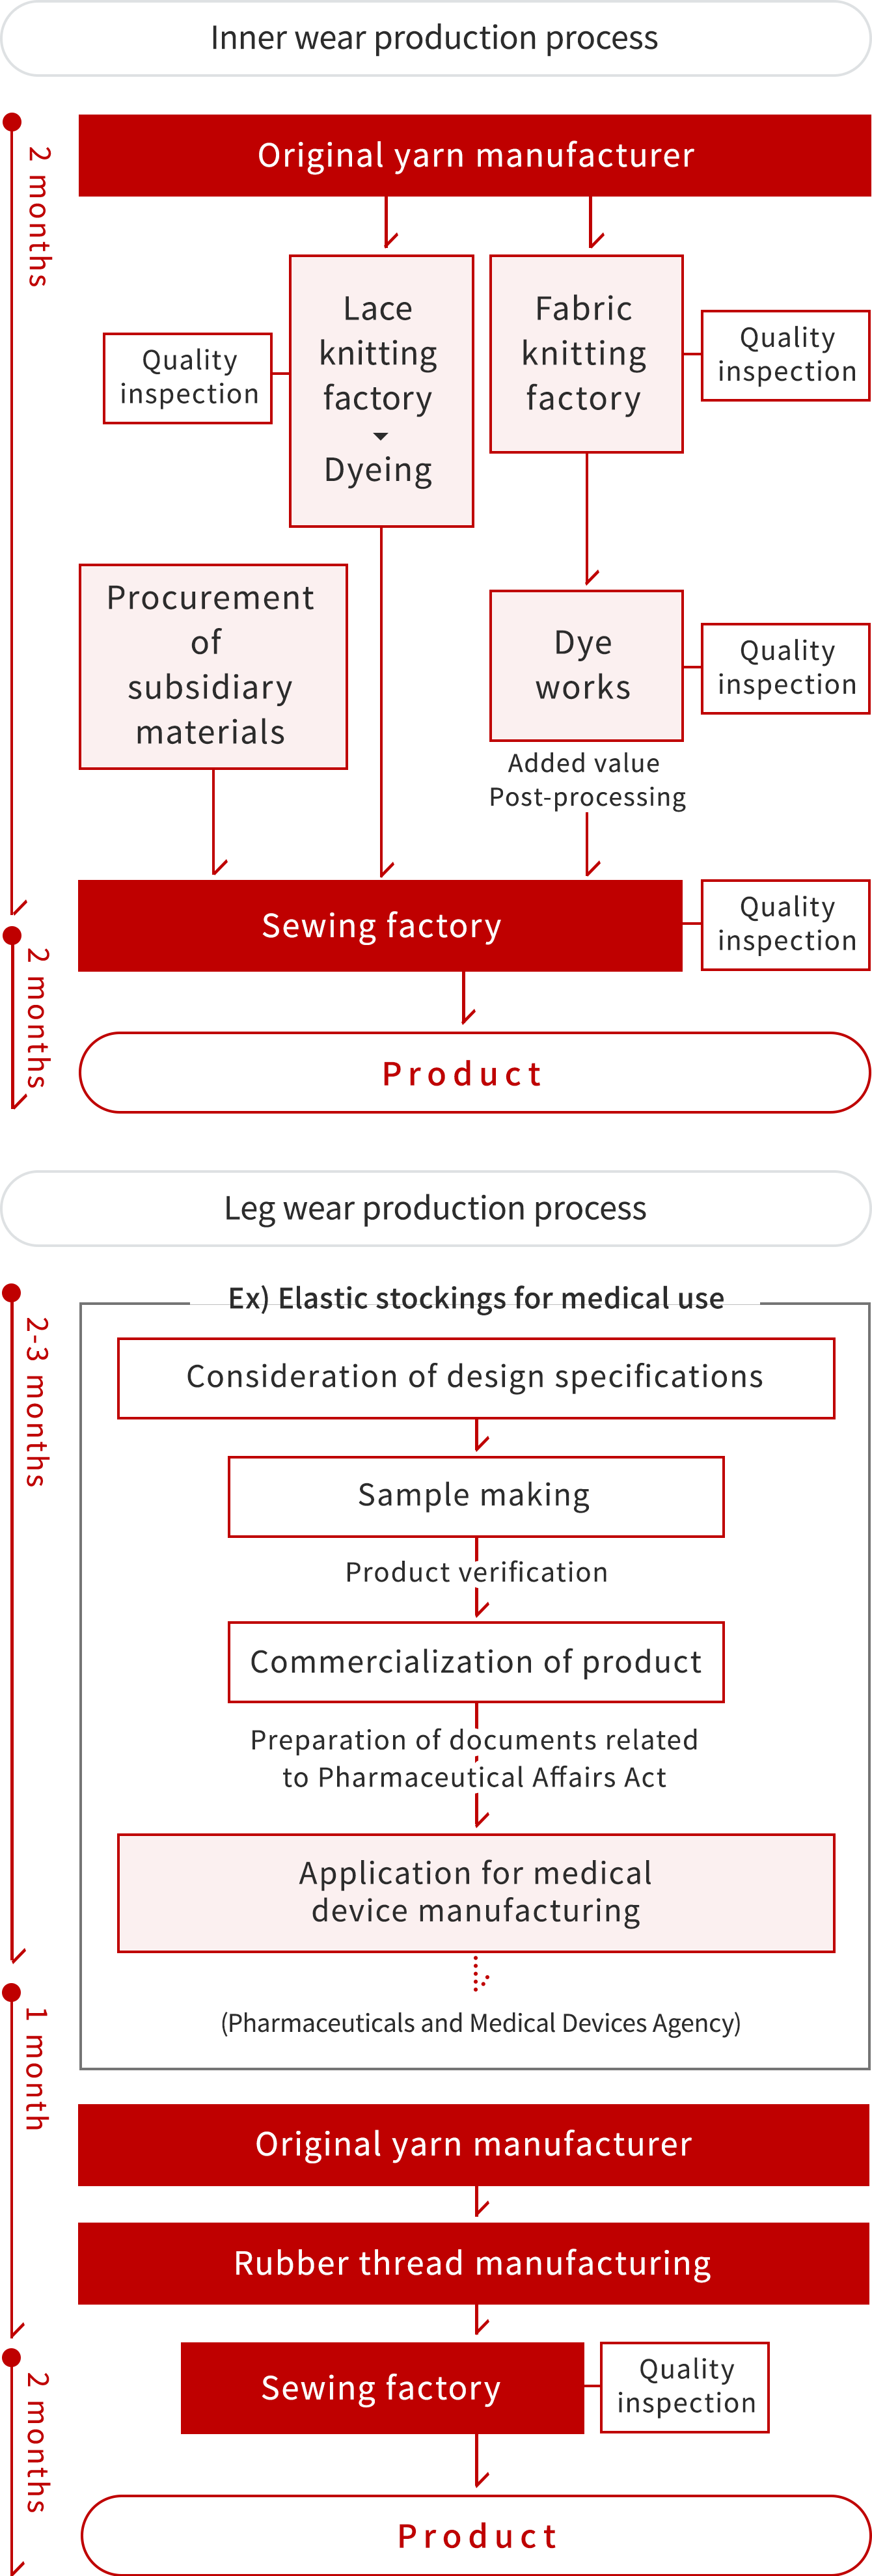 diagram of inner wear and leg wear production processes